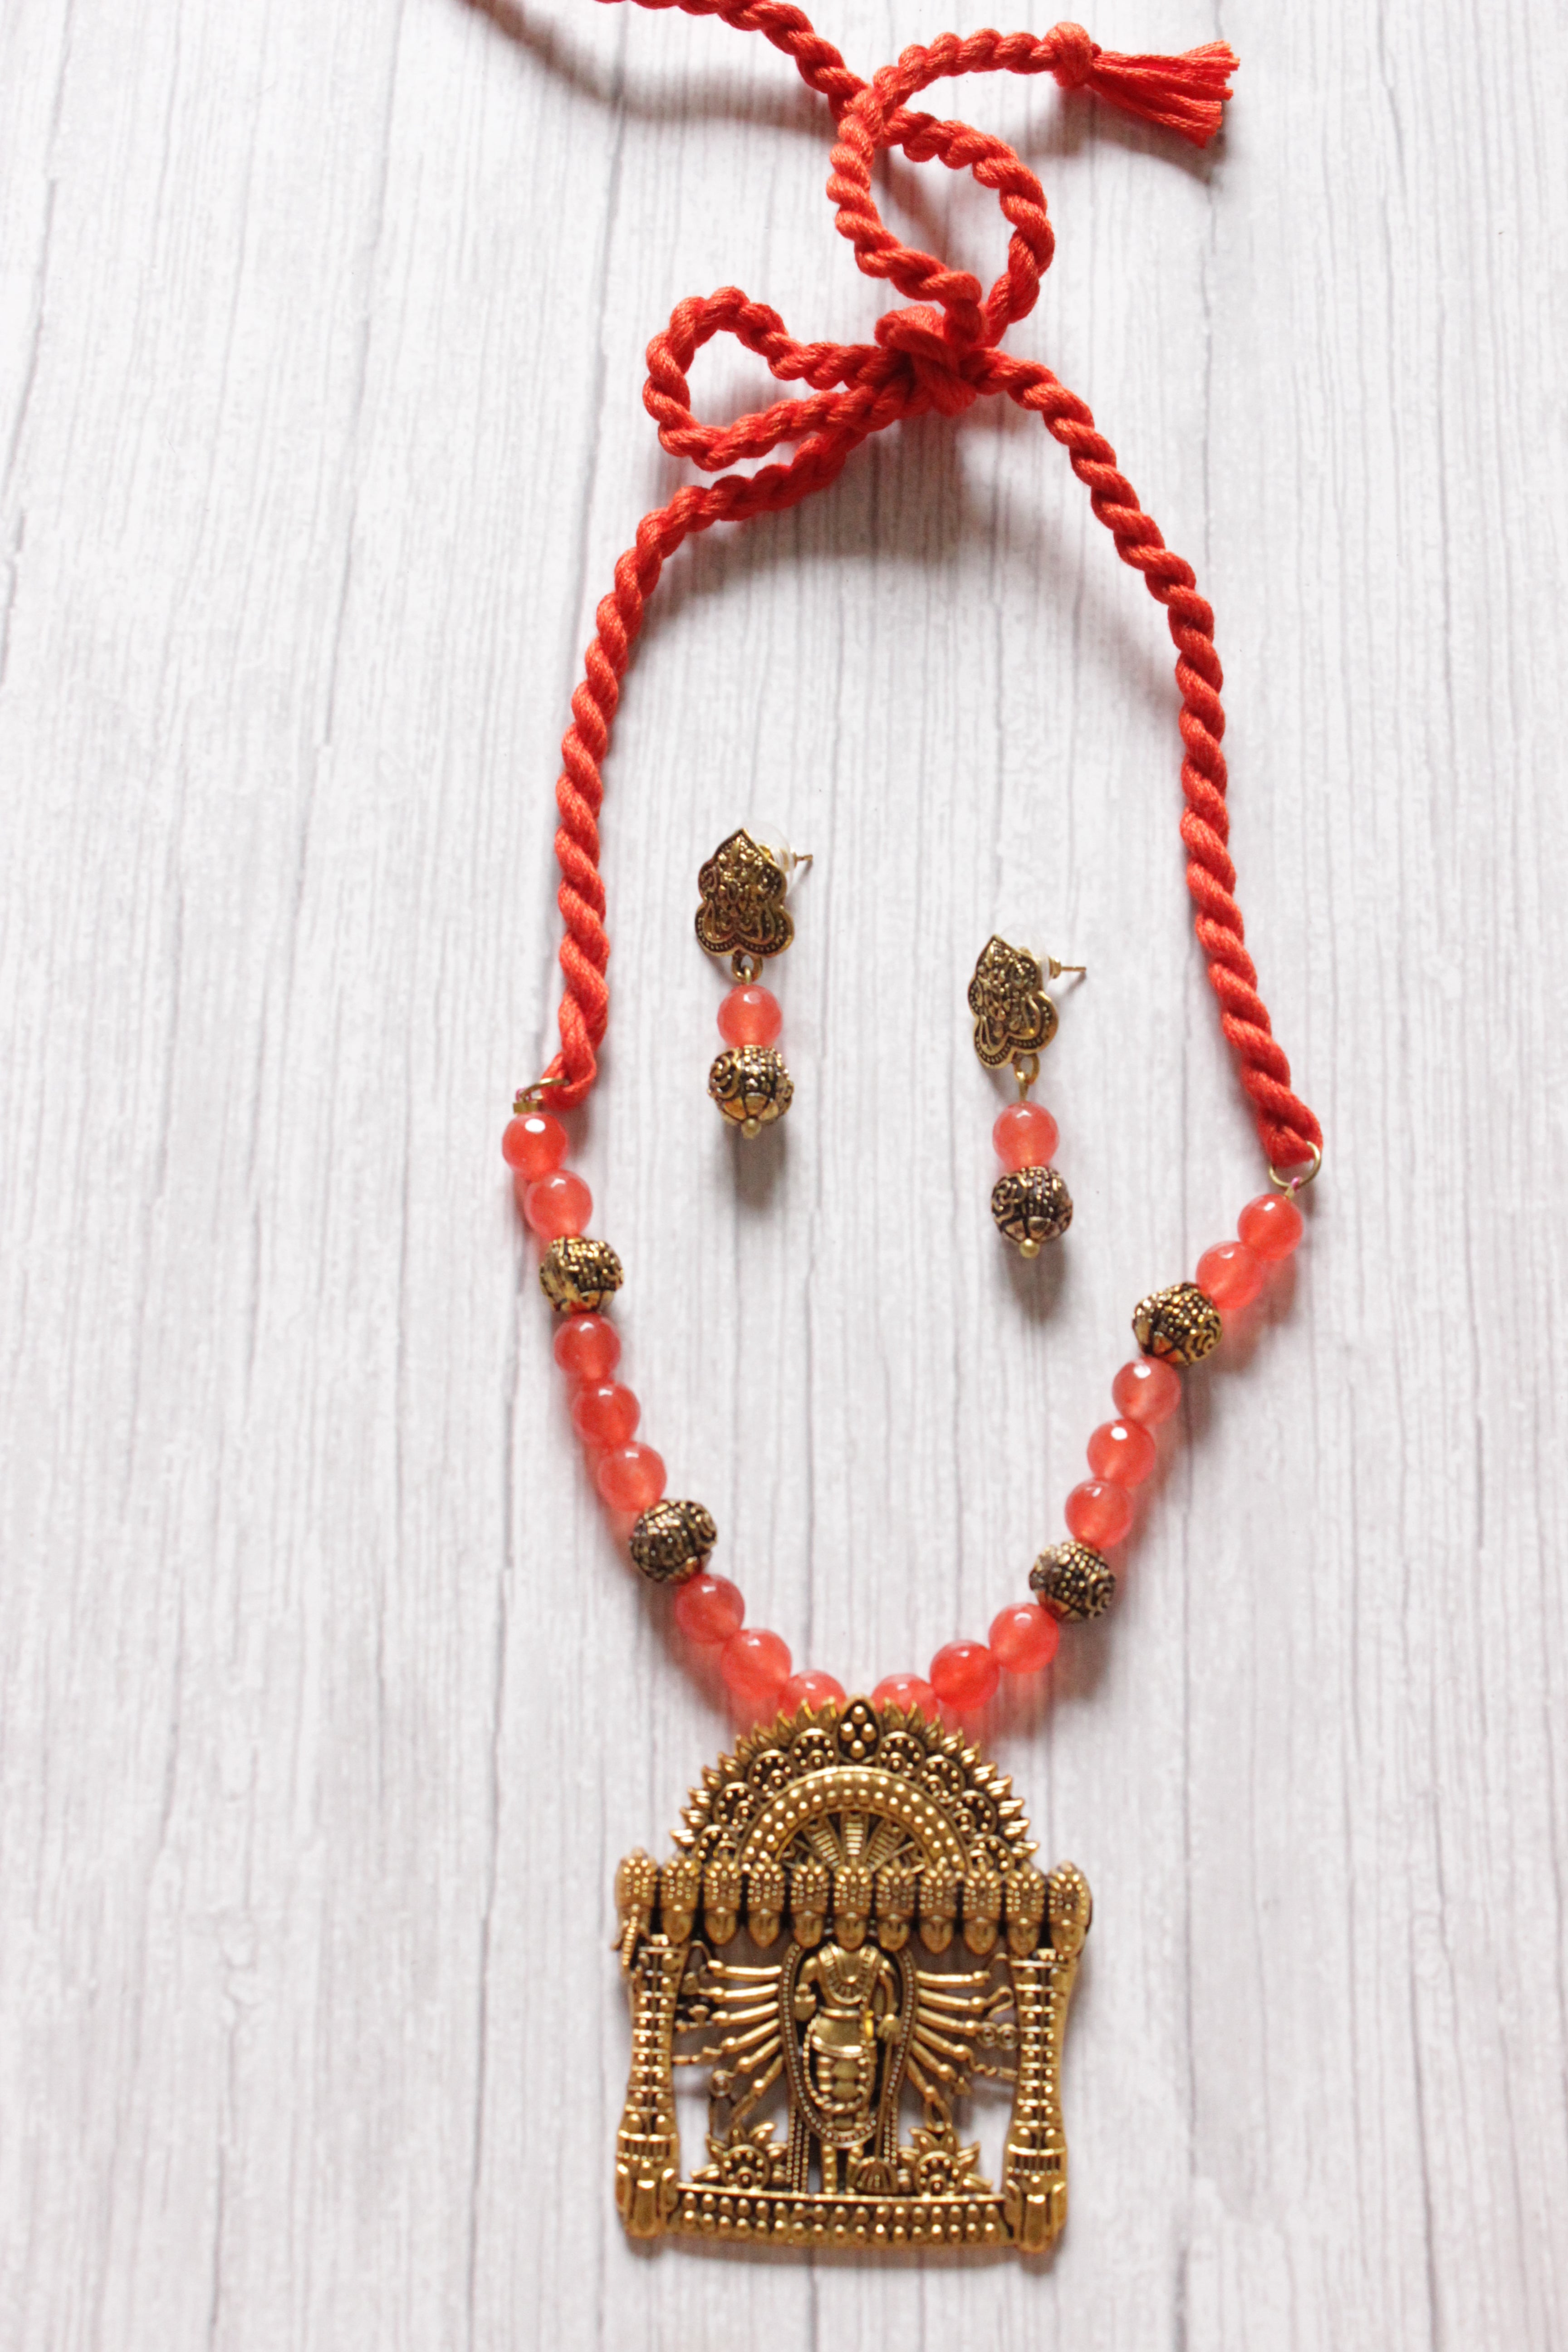 Red Jade Beads Rope Closure Necklace Set with Antique Gold Finish Metal Pendant